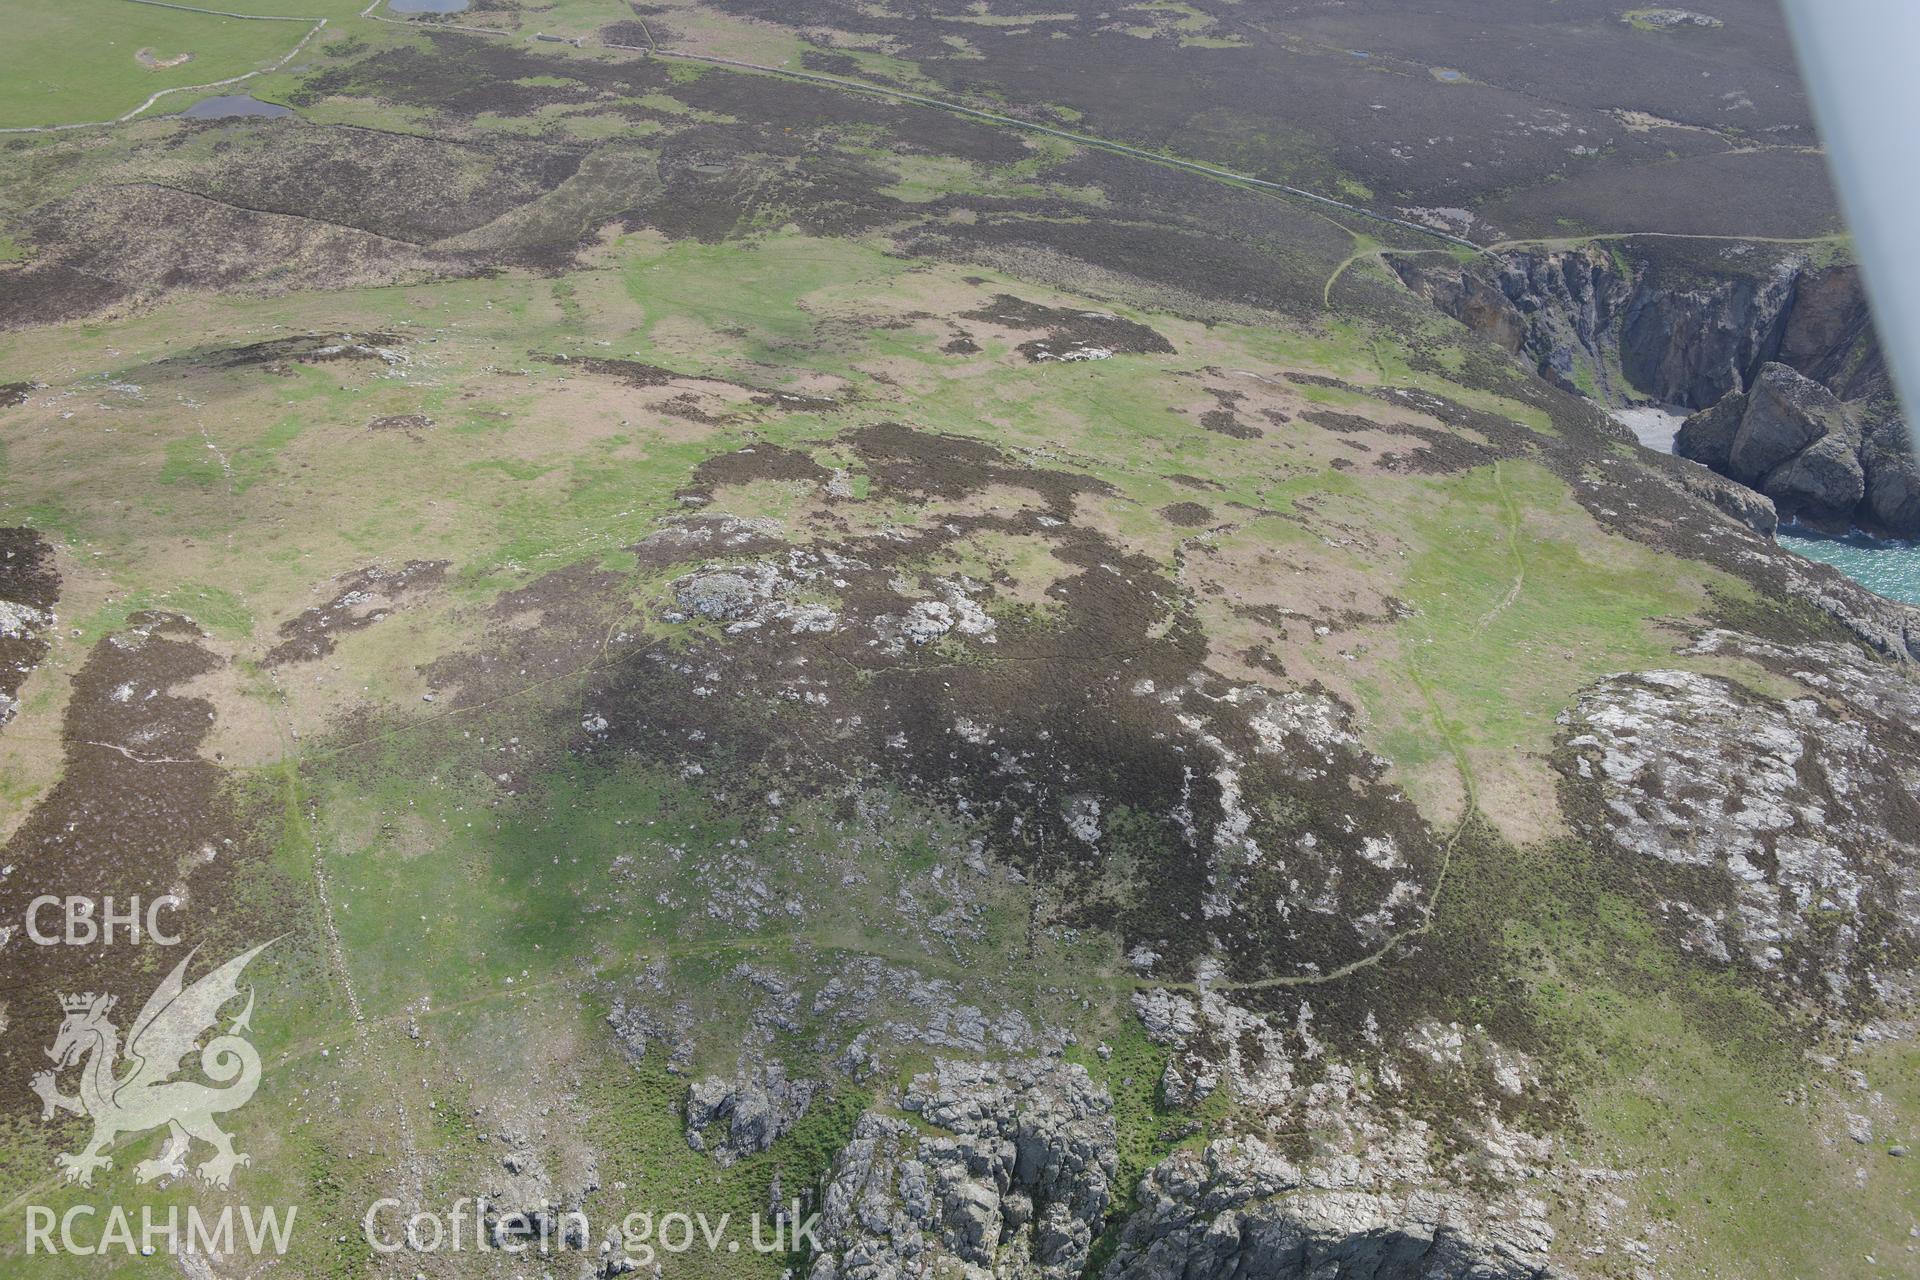 Carn Llundain and its relict field walls on Ramsey Island. Oblique aerial photograph taken during the Royal Commission's programme of archaeological aerial reconnaissance by Toby Driver on 13th May 2015.